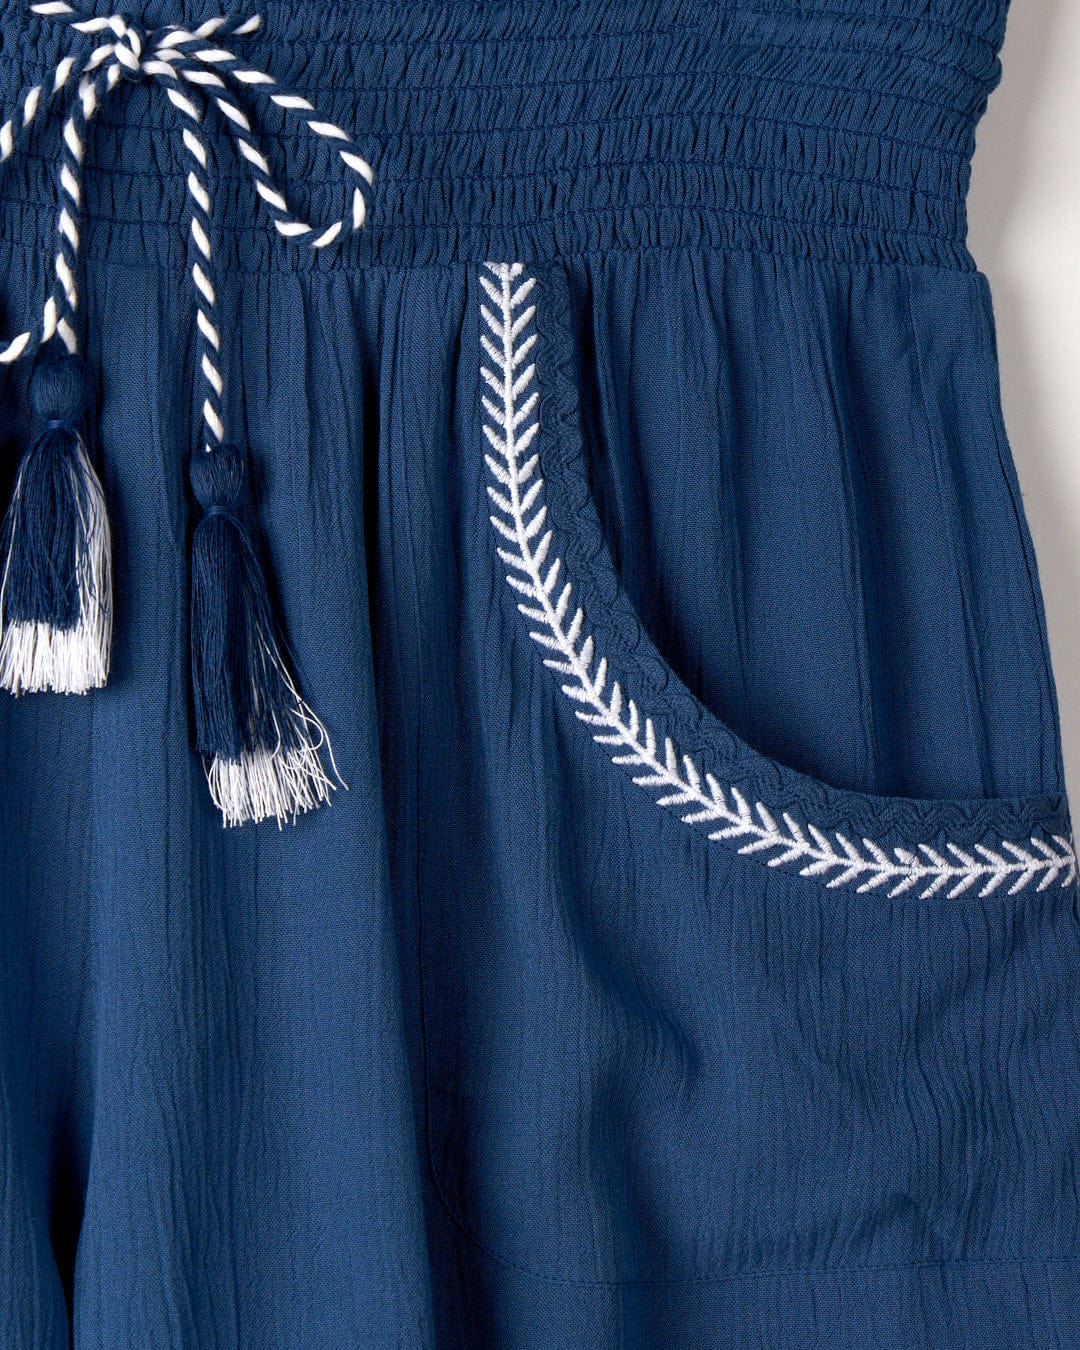 Close-up of a blue fabric garment with a white embroidered pocket and tassel details on a drawstring. The lightweight material boasts a textured appearance, complemented by delicate embroidered edging. This is the Jonie - Womens Shorts - Blue by Saltrock.